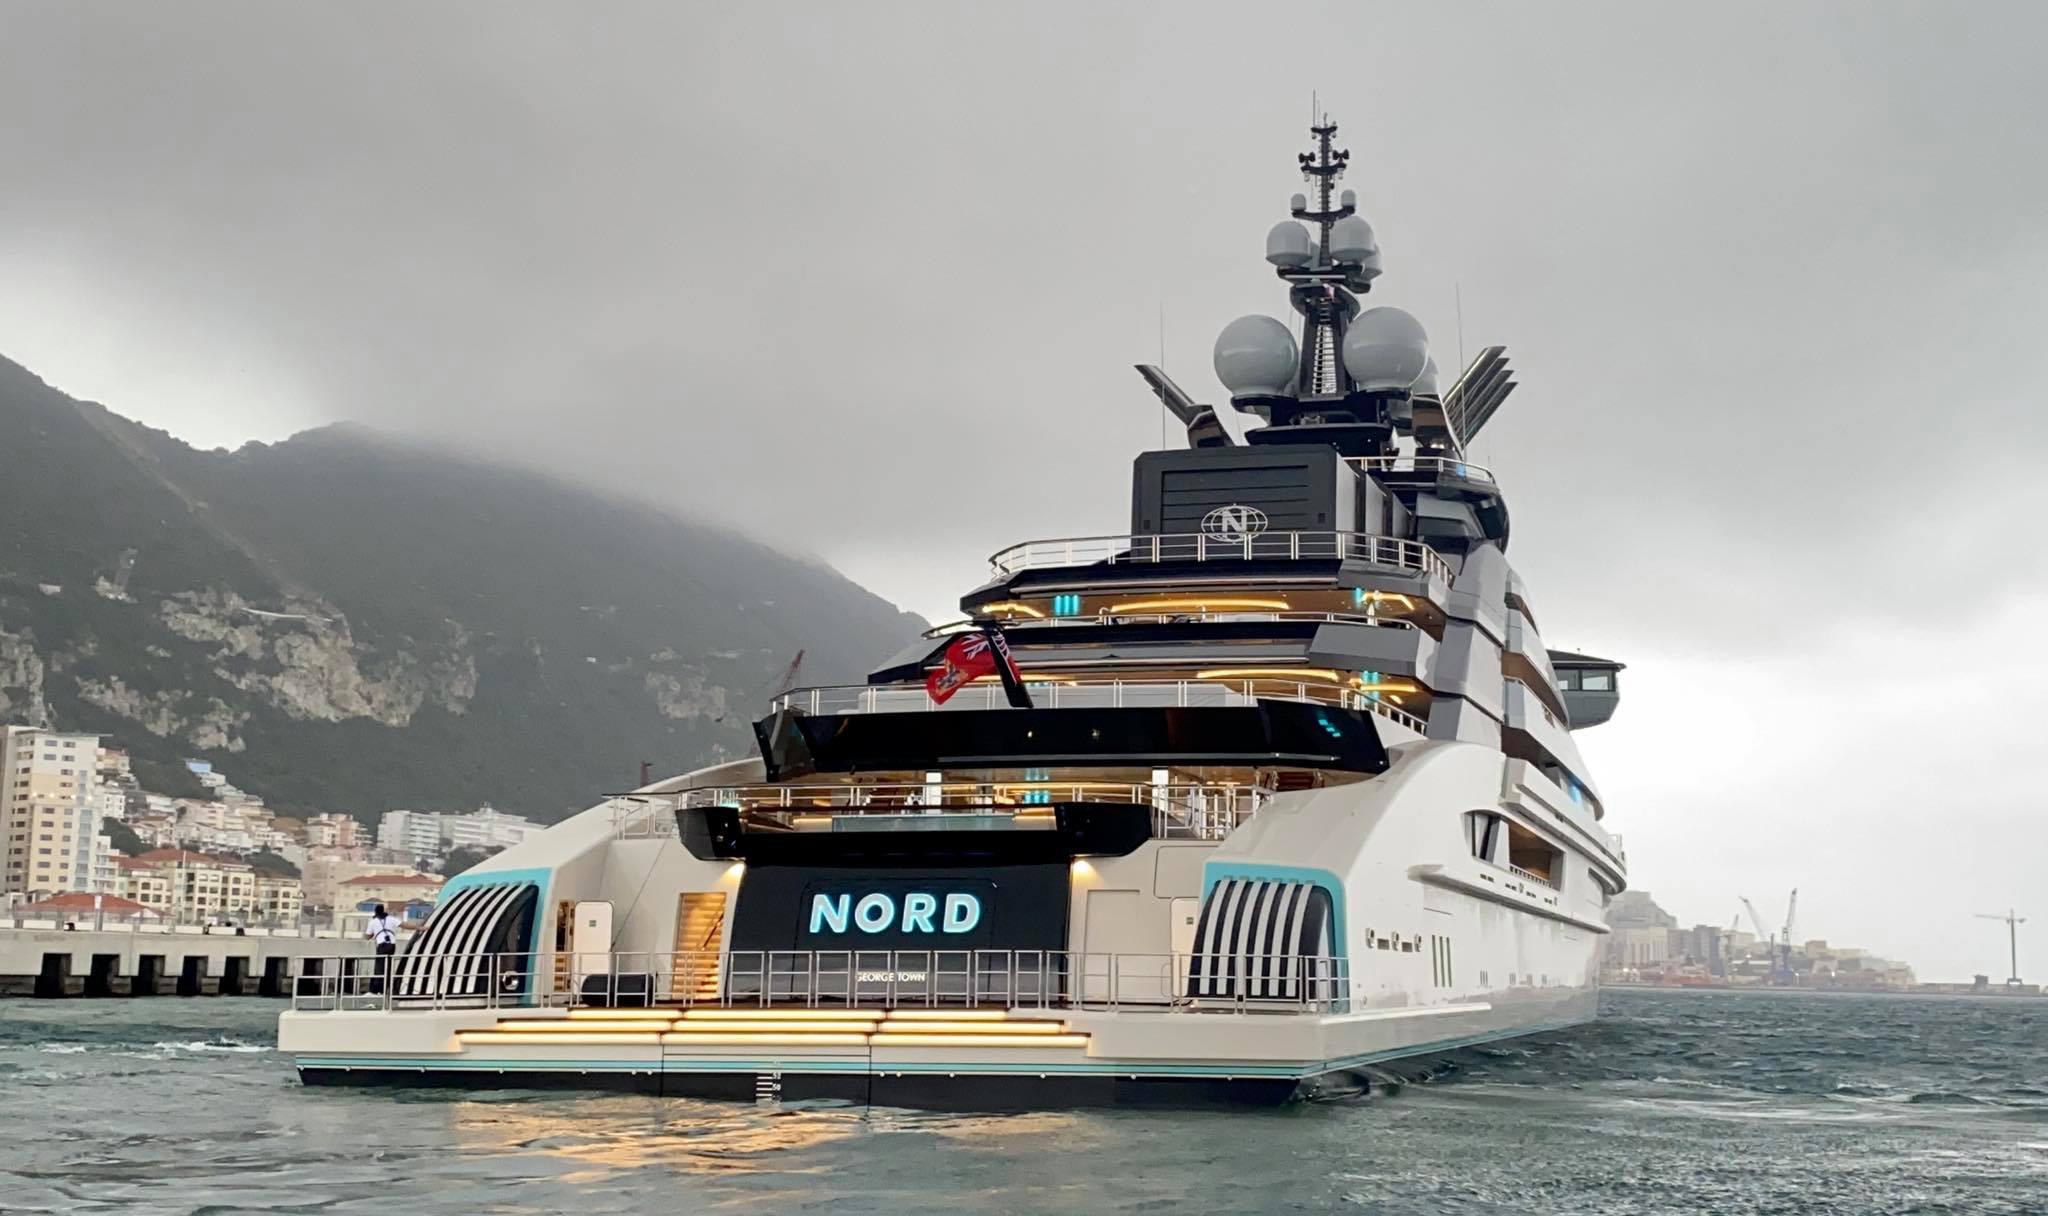 Nord Yacht